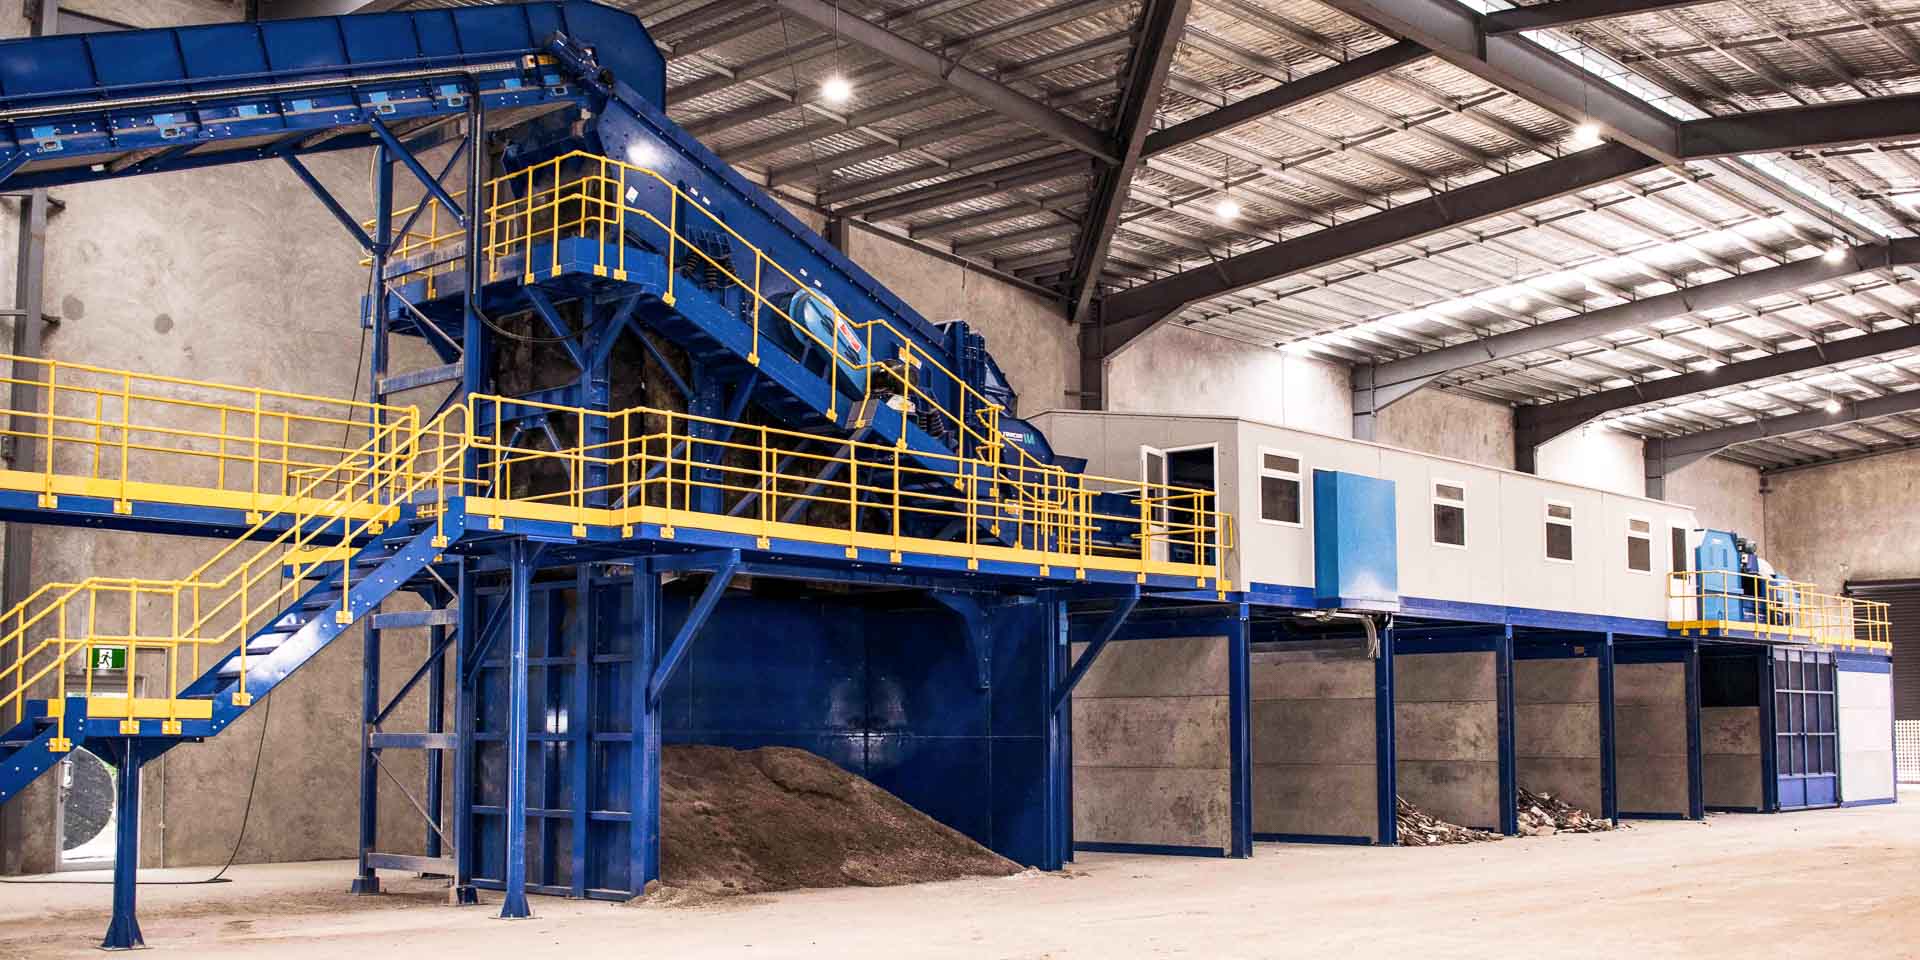  Rowcon Recycling Invests in Sustainable Future with New State-of-the-Art Facility